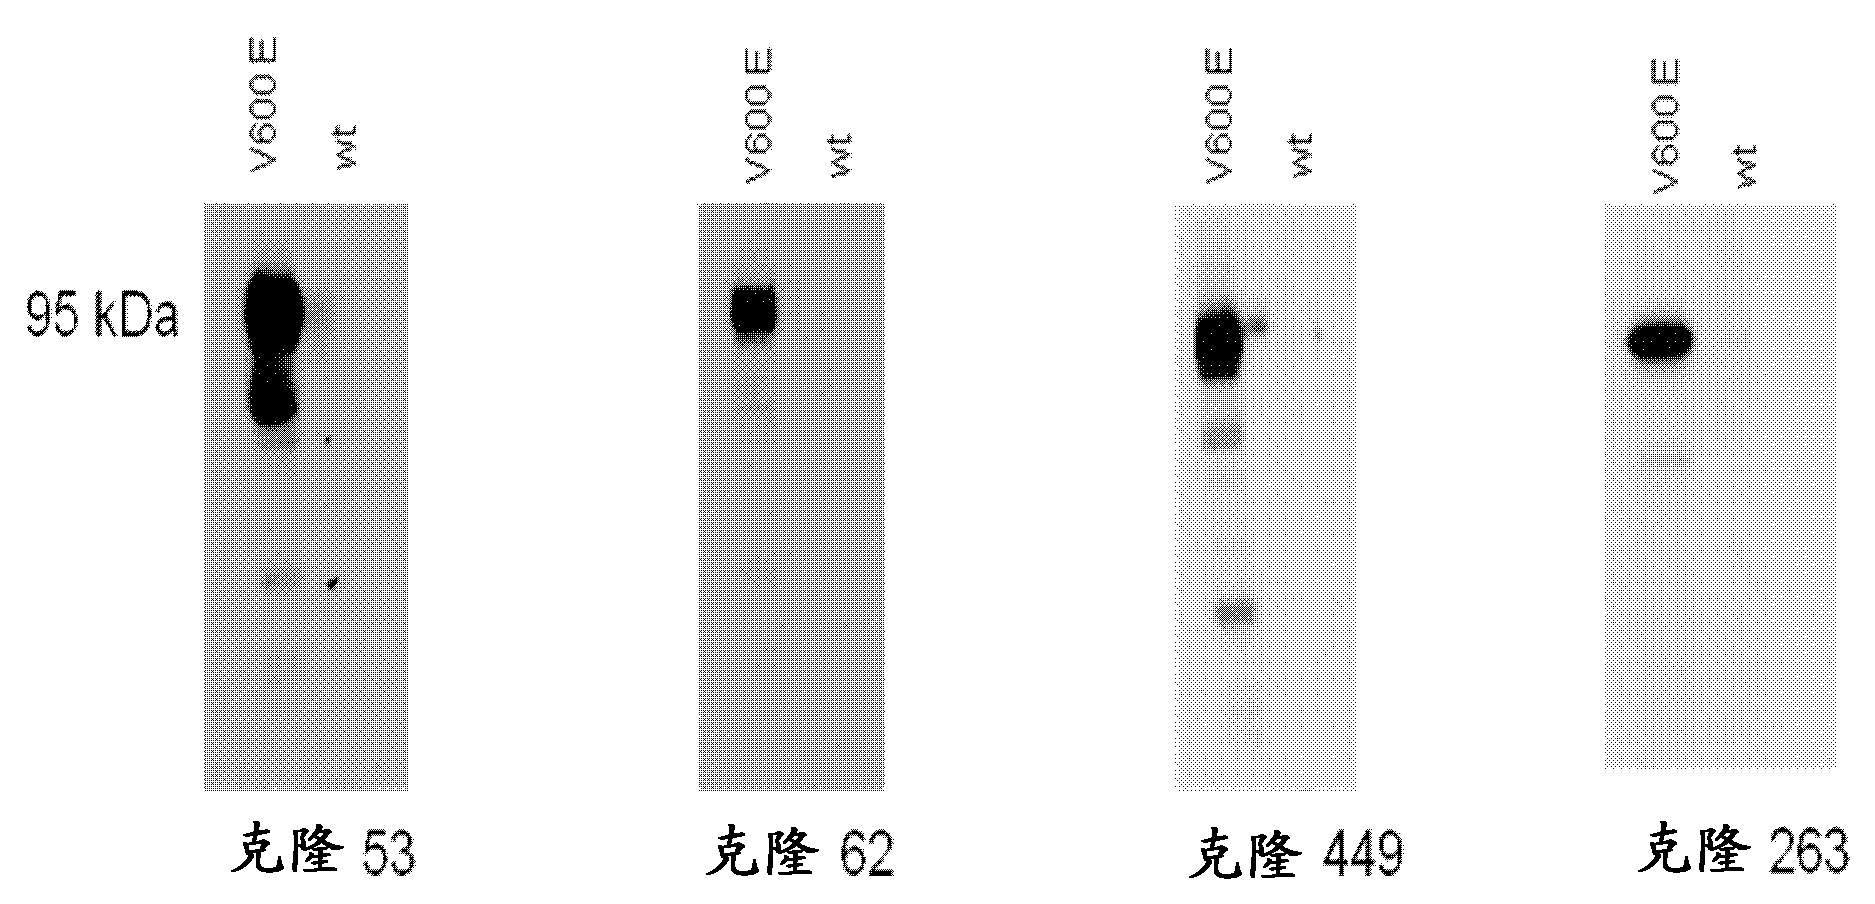 Means and methods for diagnosing cancer using an antibody which specifically binds to BRAF V600E